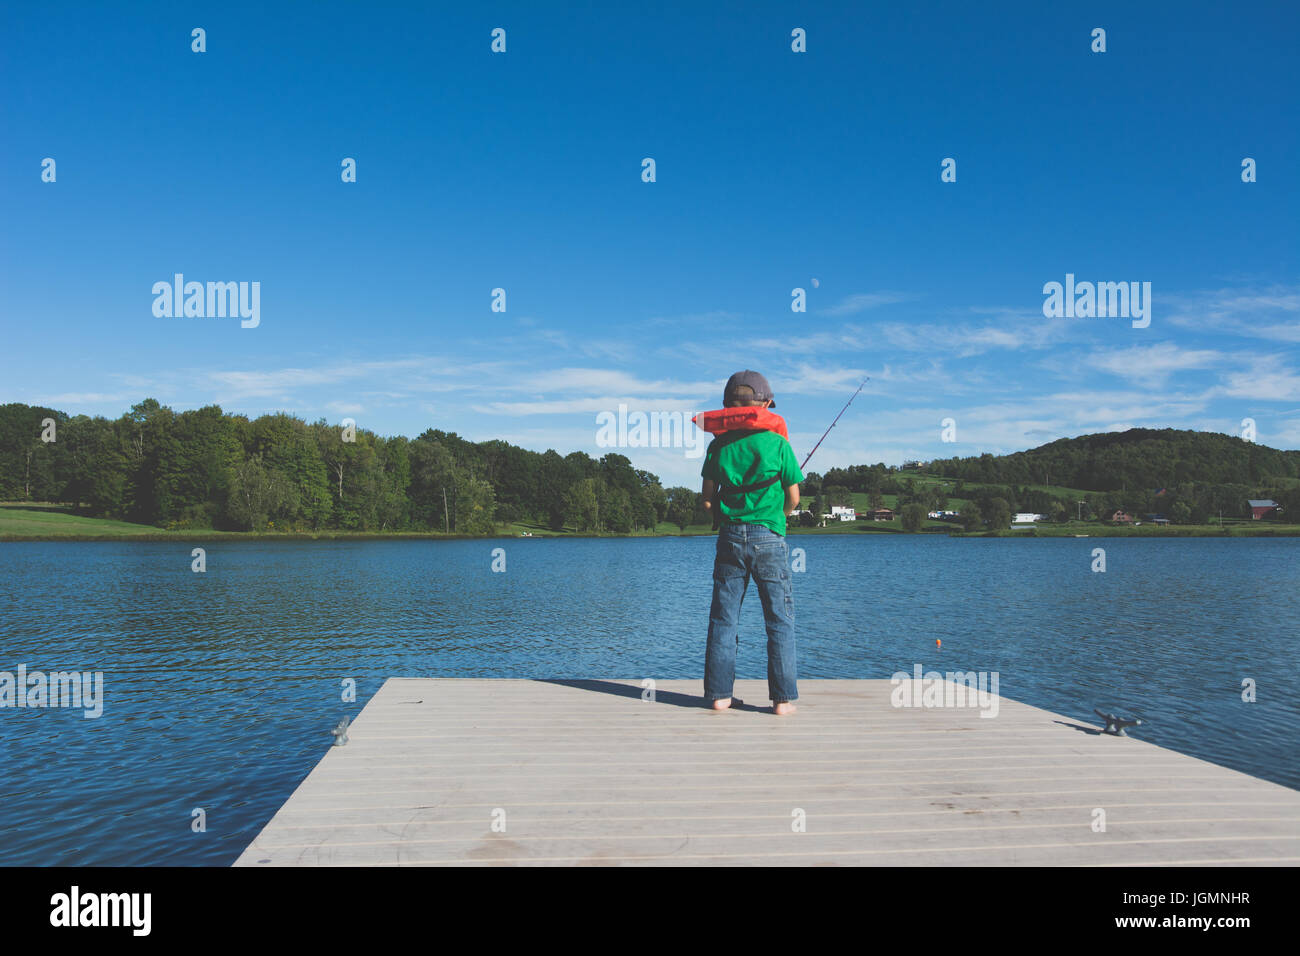 A child fishing on a dock at a pond in a rural area. Stock Photo